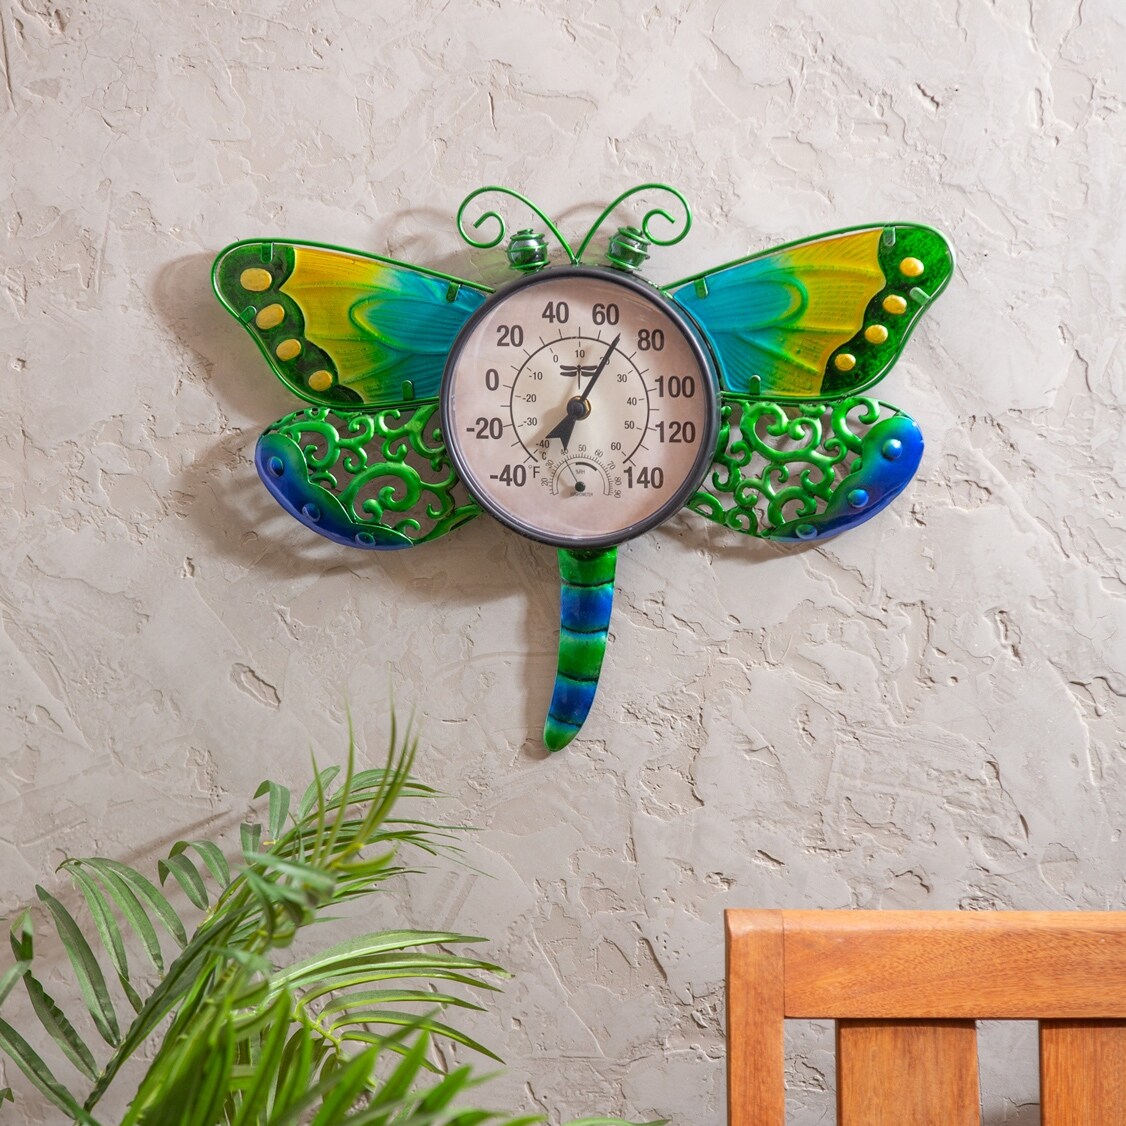 https://ak1.ostkcdn.com/images/products/is/images/direct/d114be1641f279419065ae1b69a2ffbc70f58742/Dragonfly-Outdoor-Wall-Thermometer.jpg